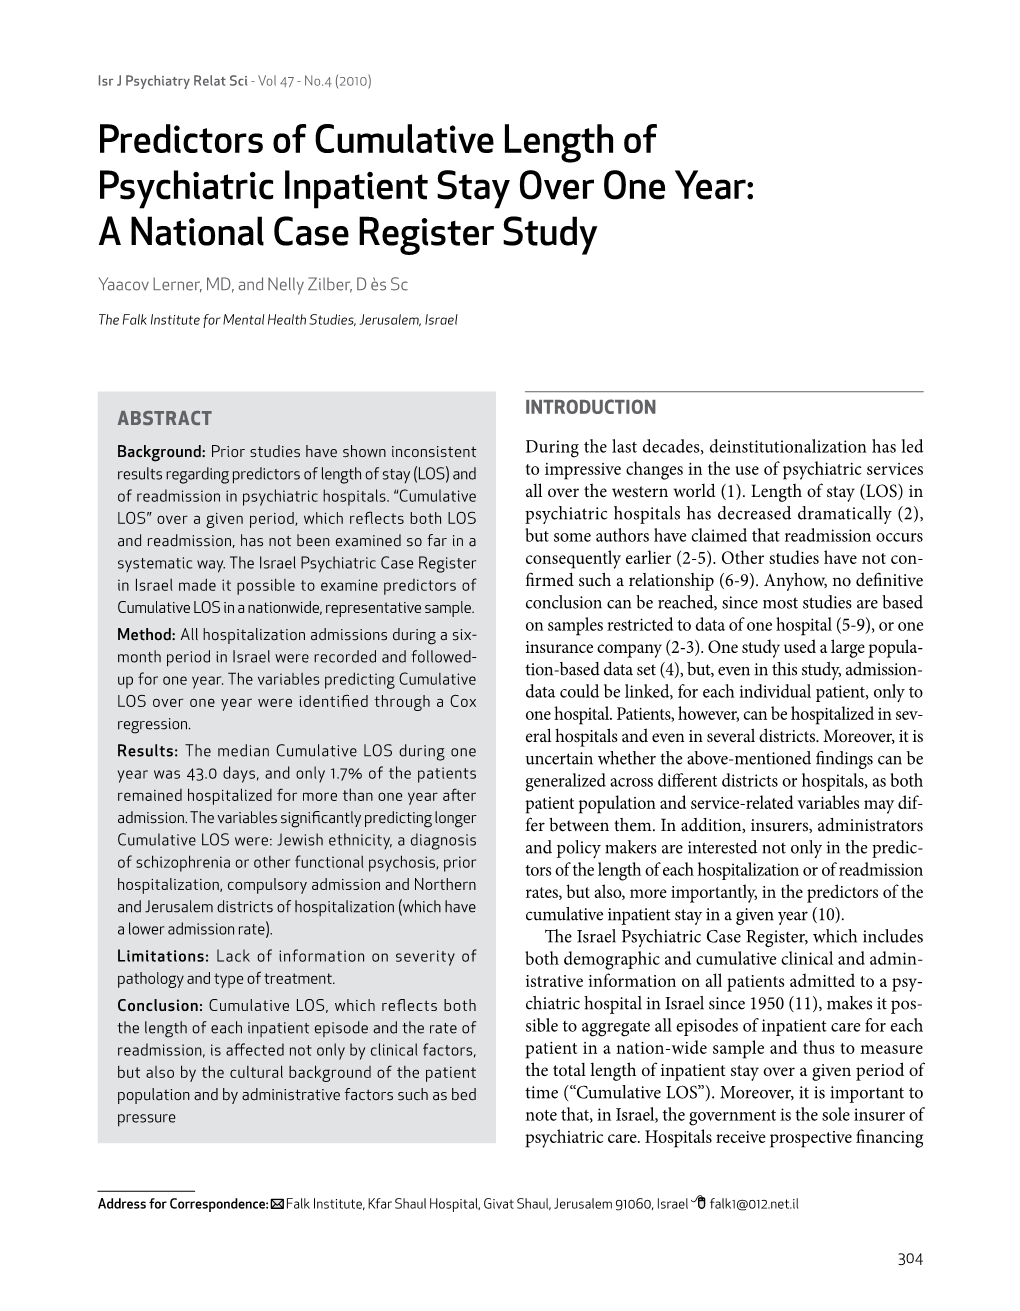 Predictors of Cumulative Length of Psychiatric Inpatient Stay Over One Year: a National Case Register Study